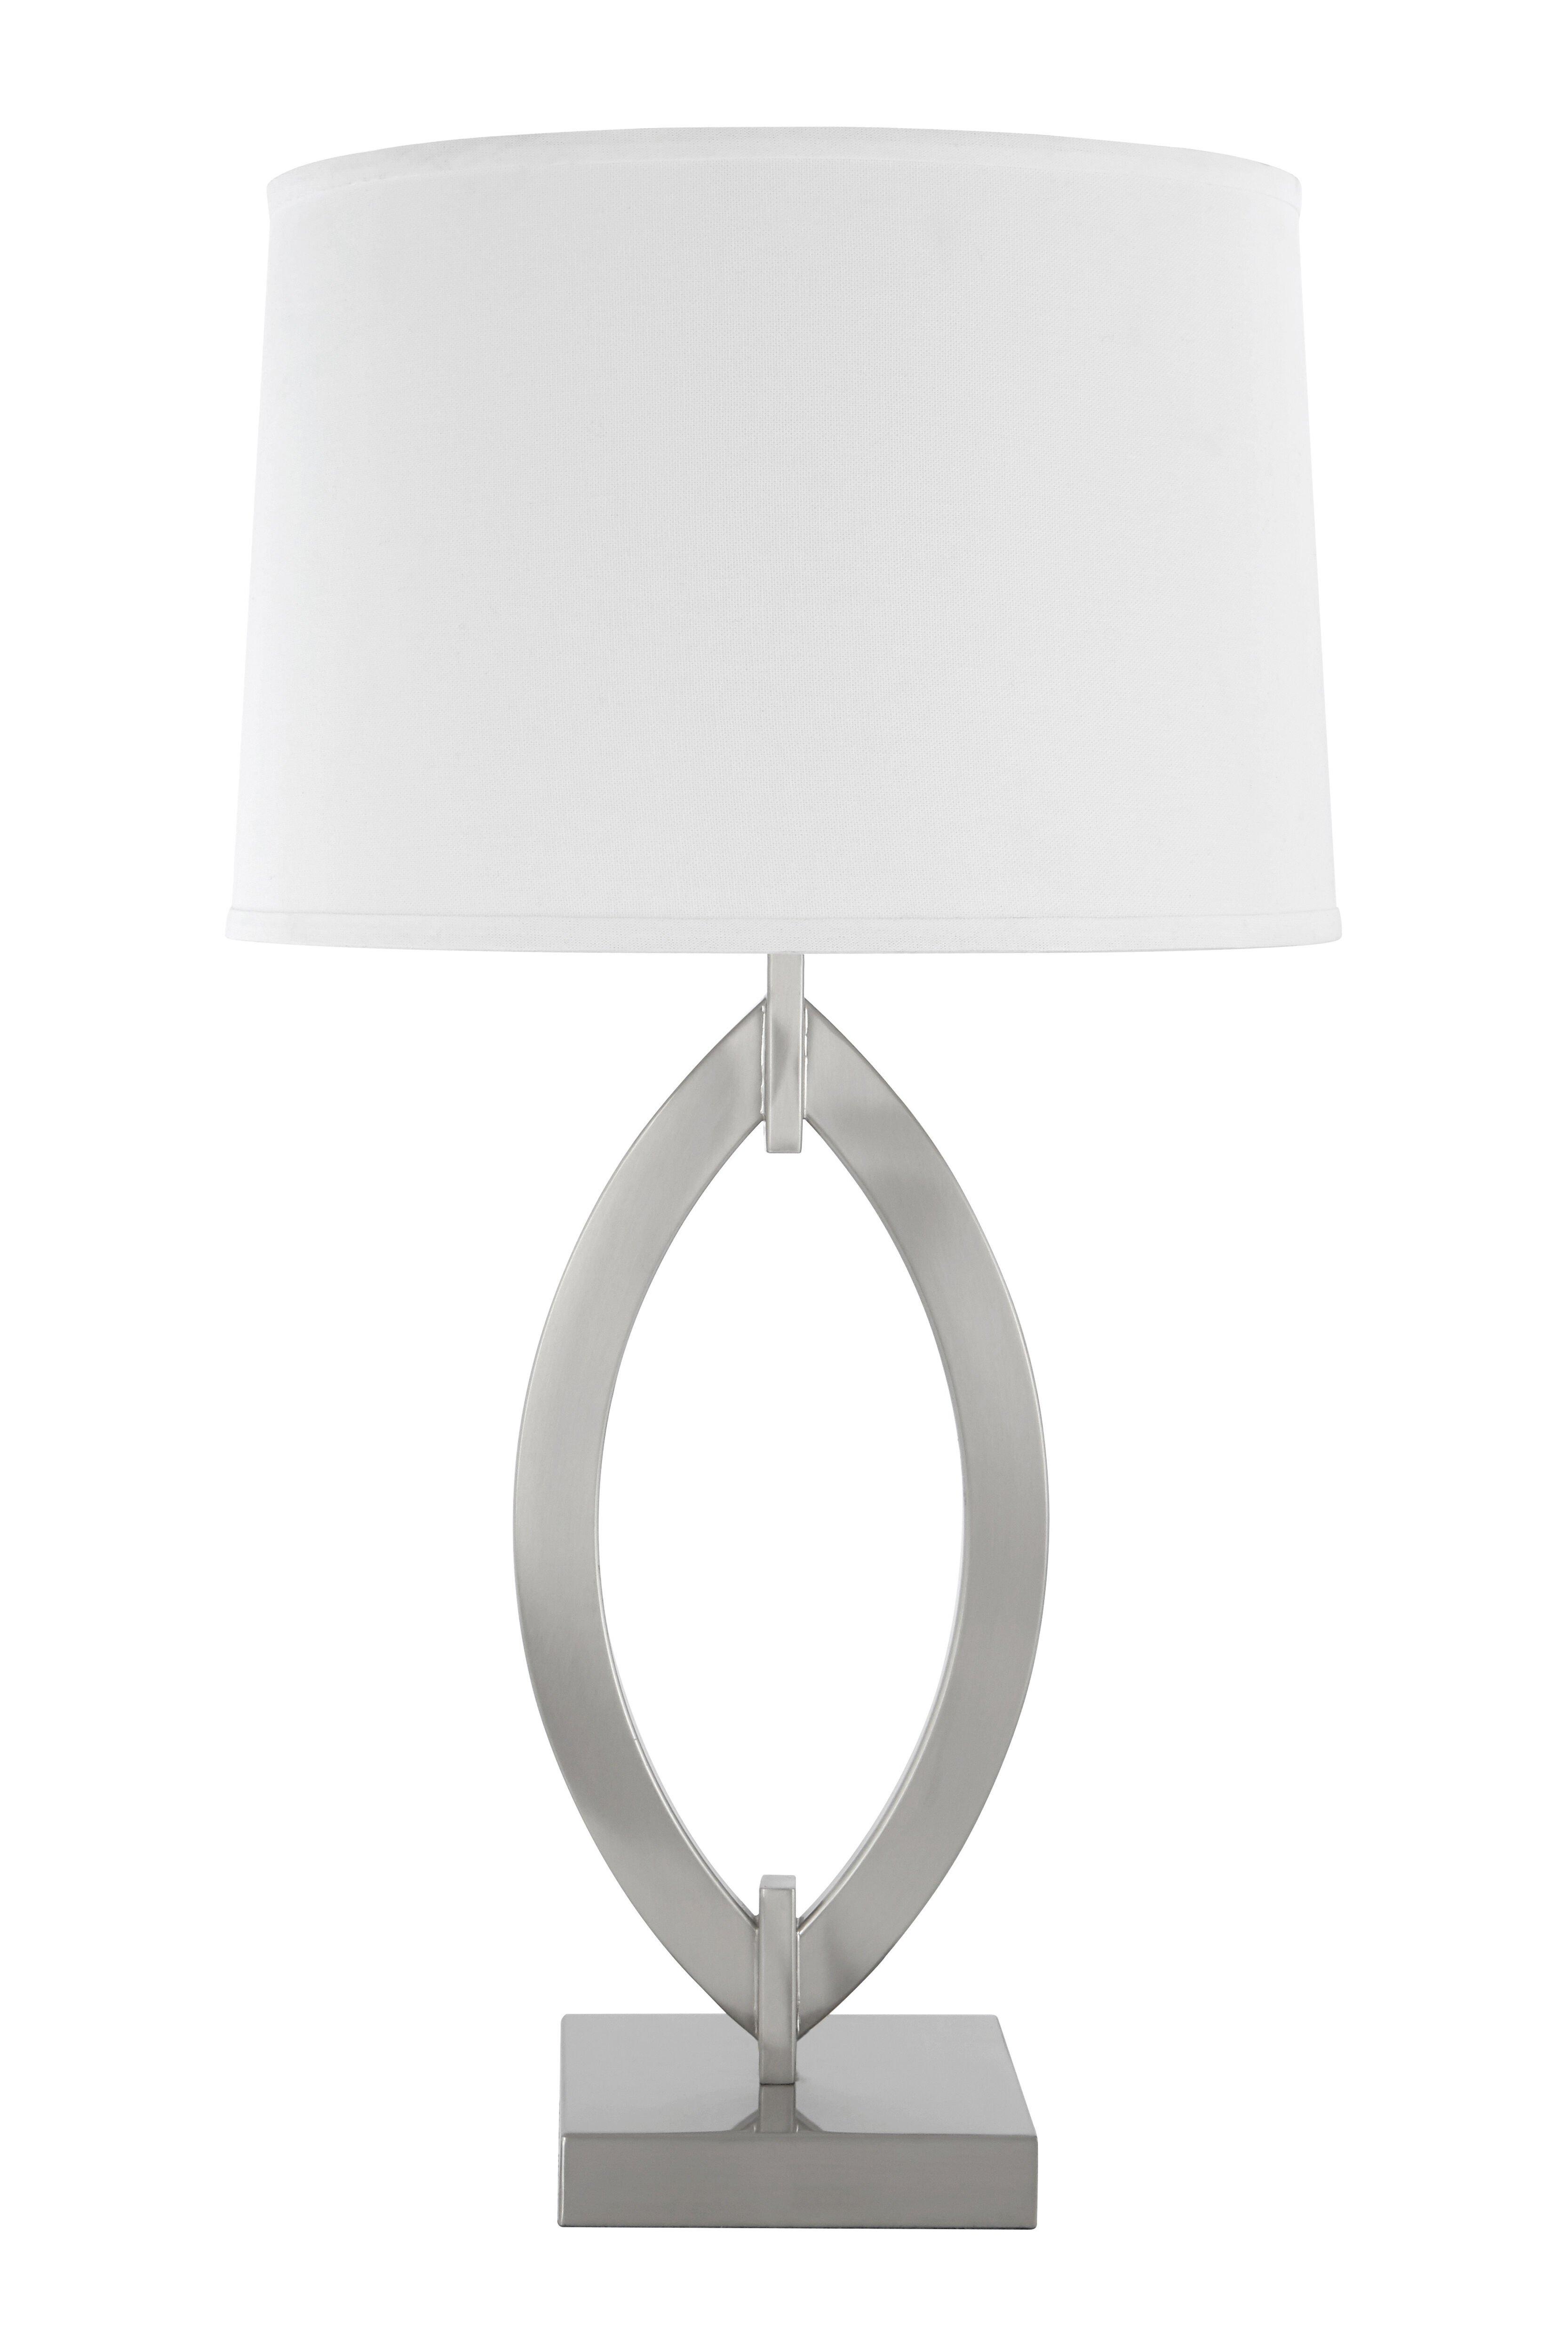 Interiors by Premier Lina Table Lamp with EU Plug